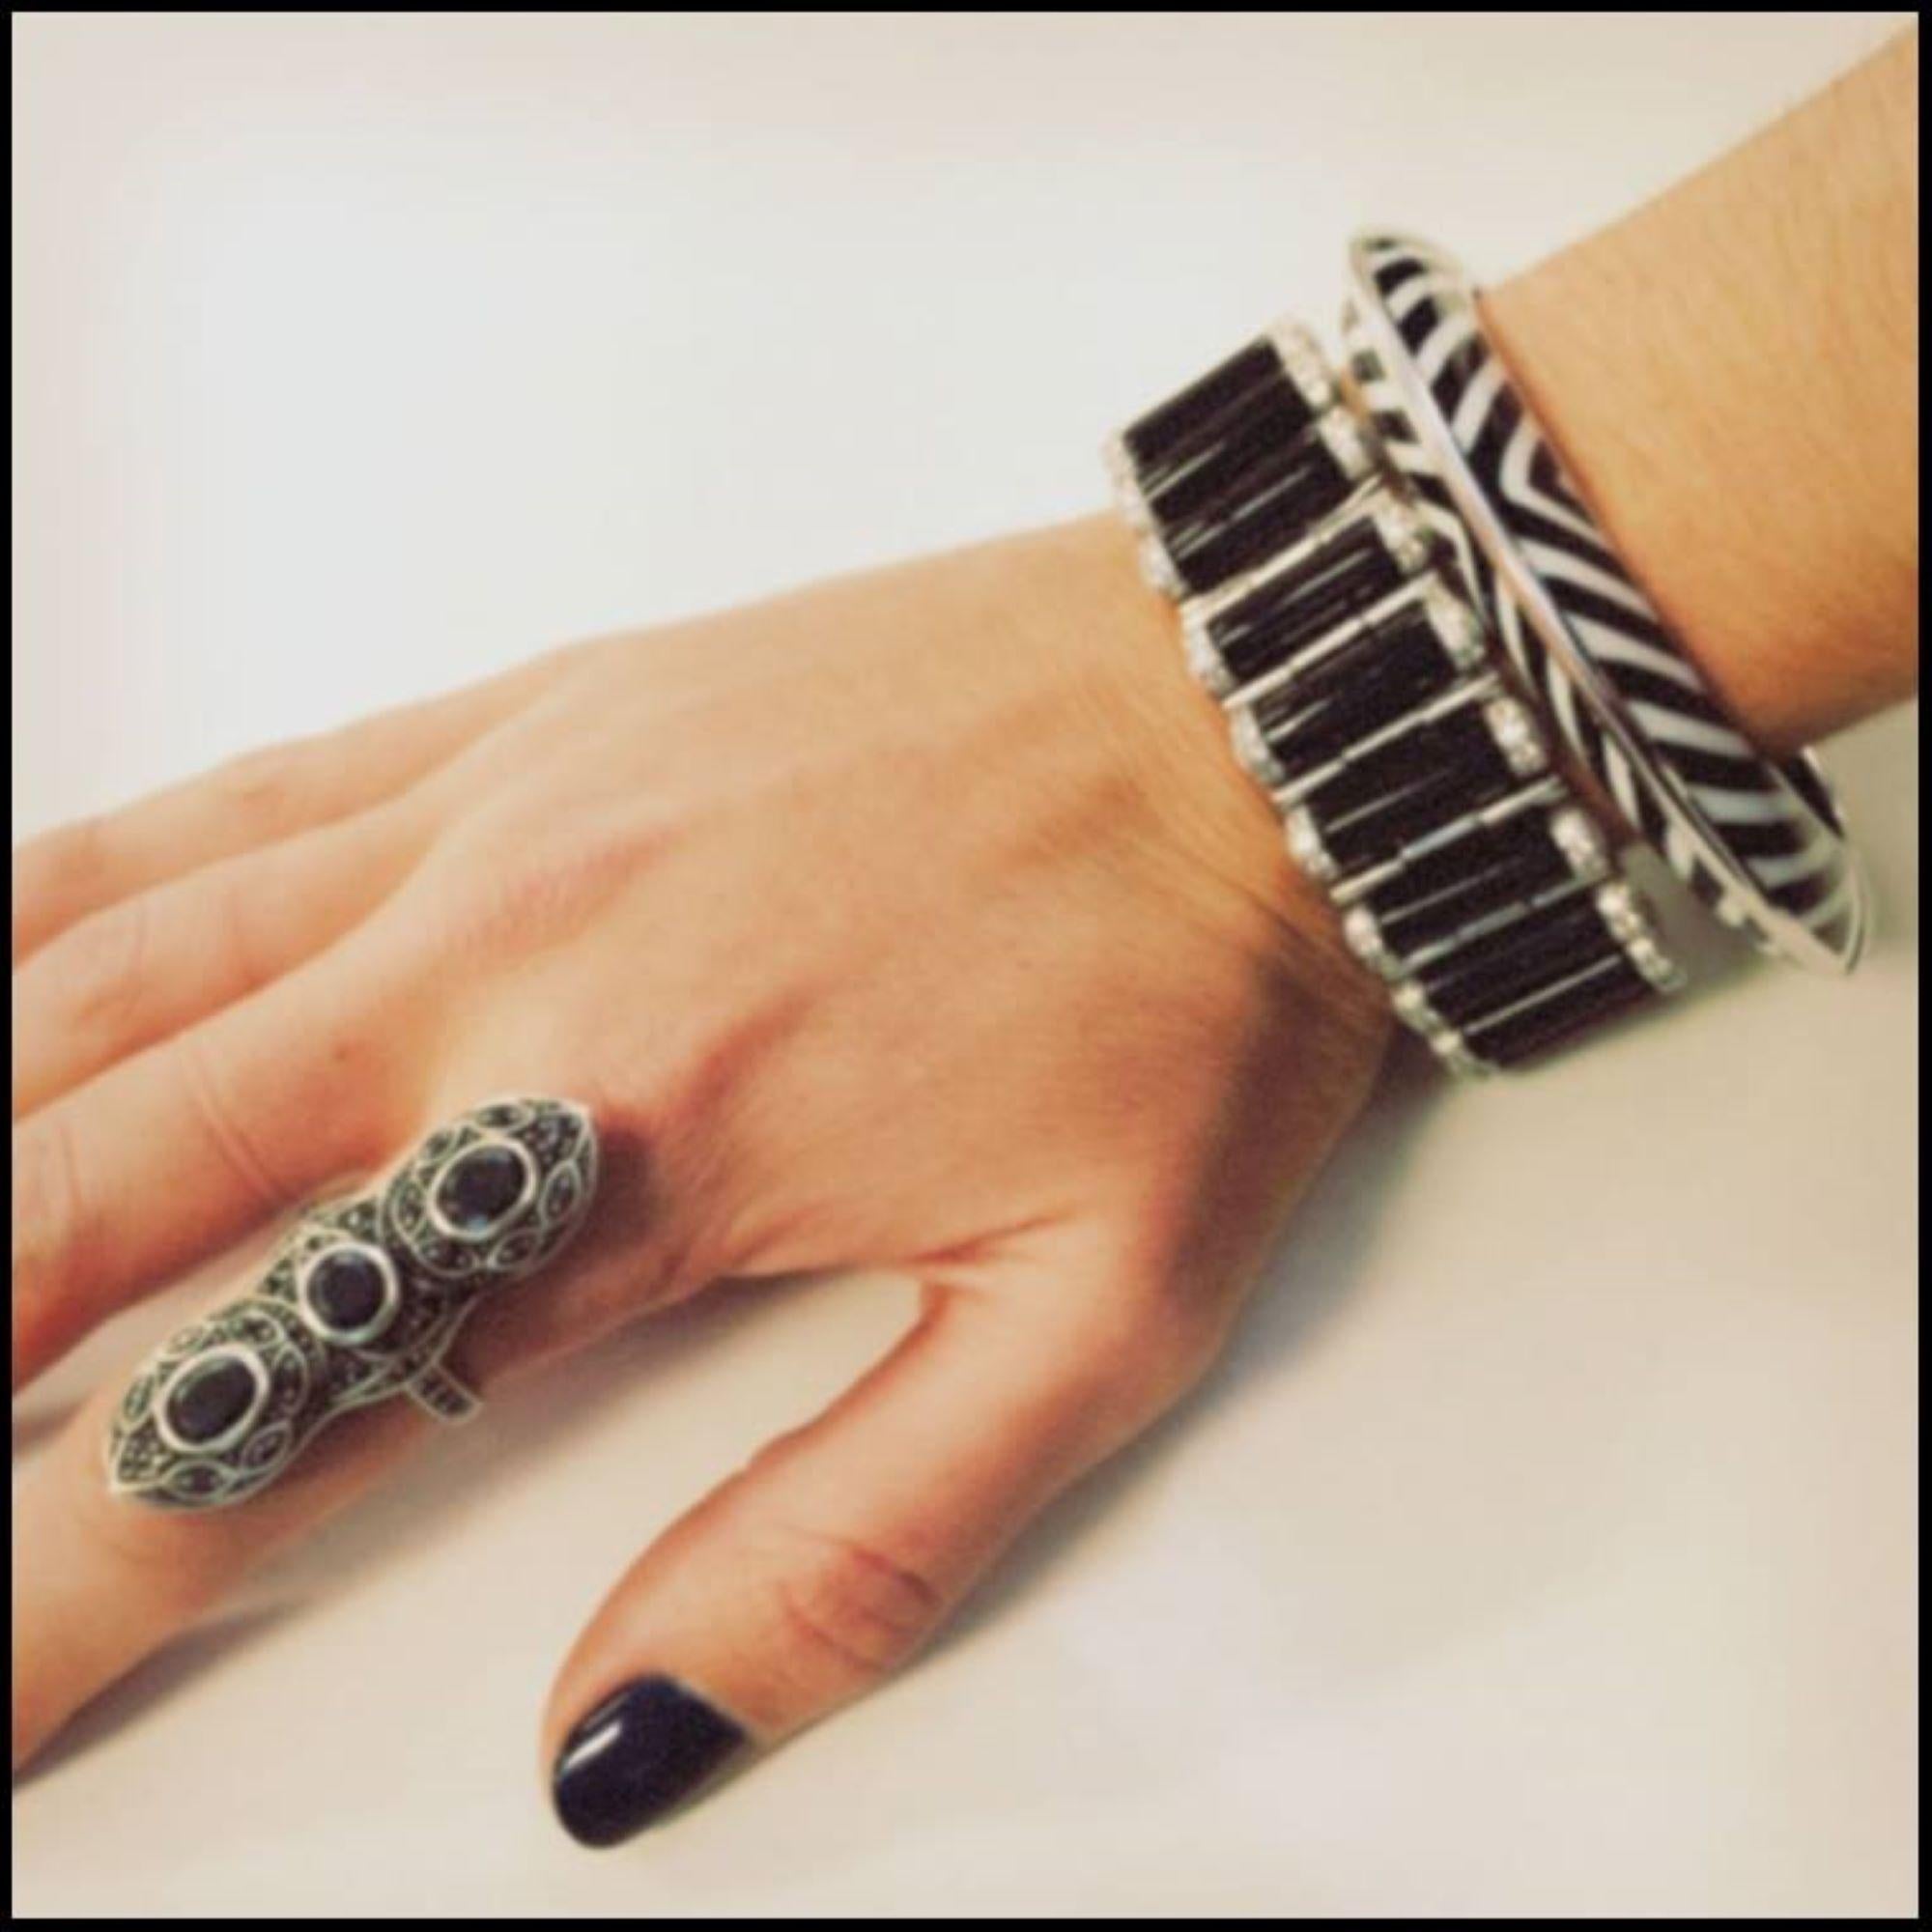 Miriam Salat Triple Noir Art Deco Ring 
Semi precious, made in vintage sterling sliver and set with black spinals. 
The setting is all hand prong setting. 
Signed MRM
Comes with a Miriam Salat pouch. 